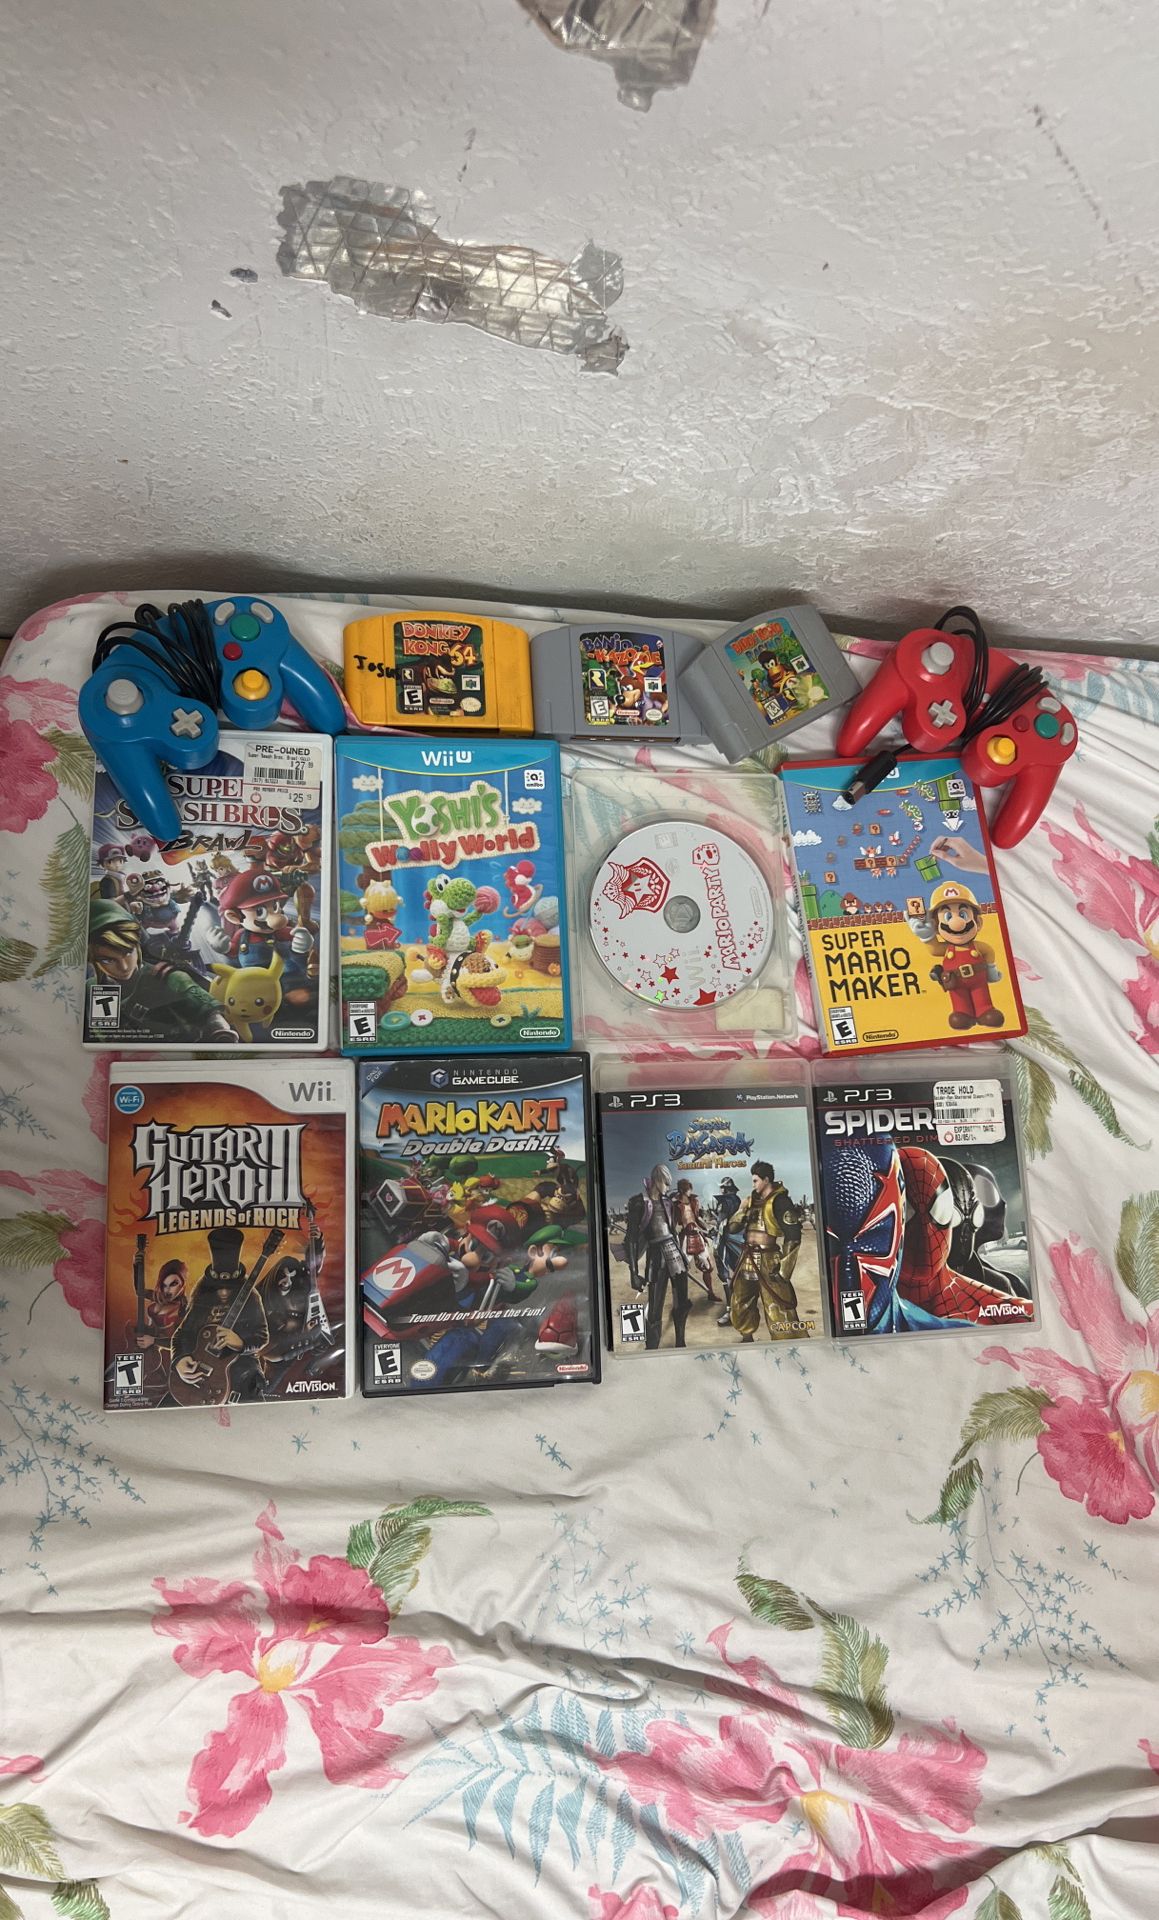 Games For Wii, PS3, N64, And Gamecube (11 Total)